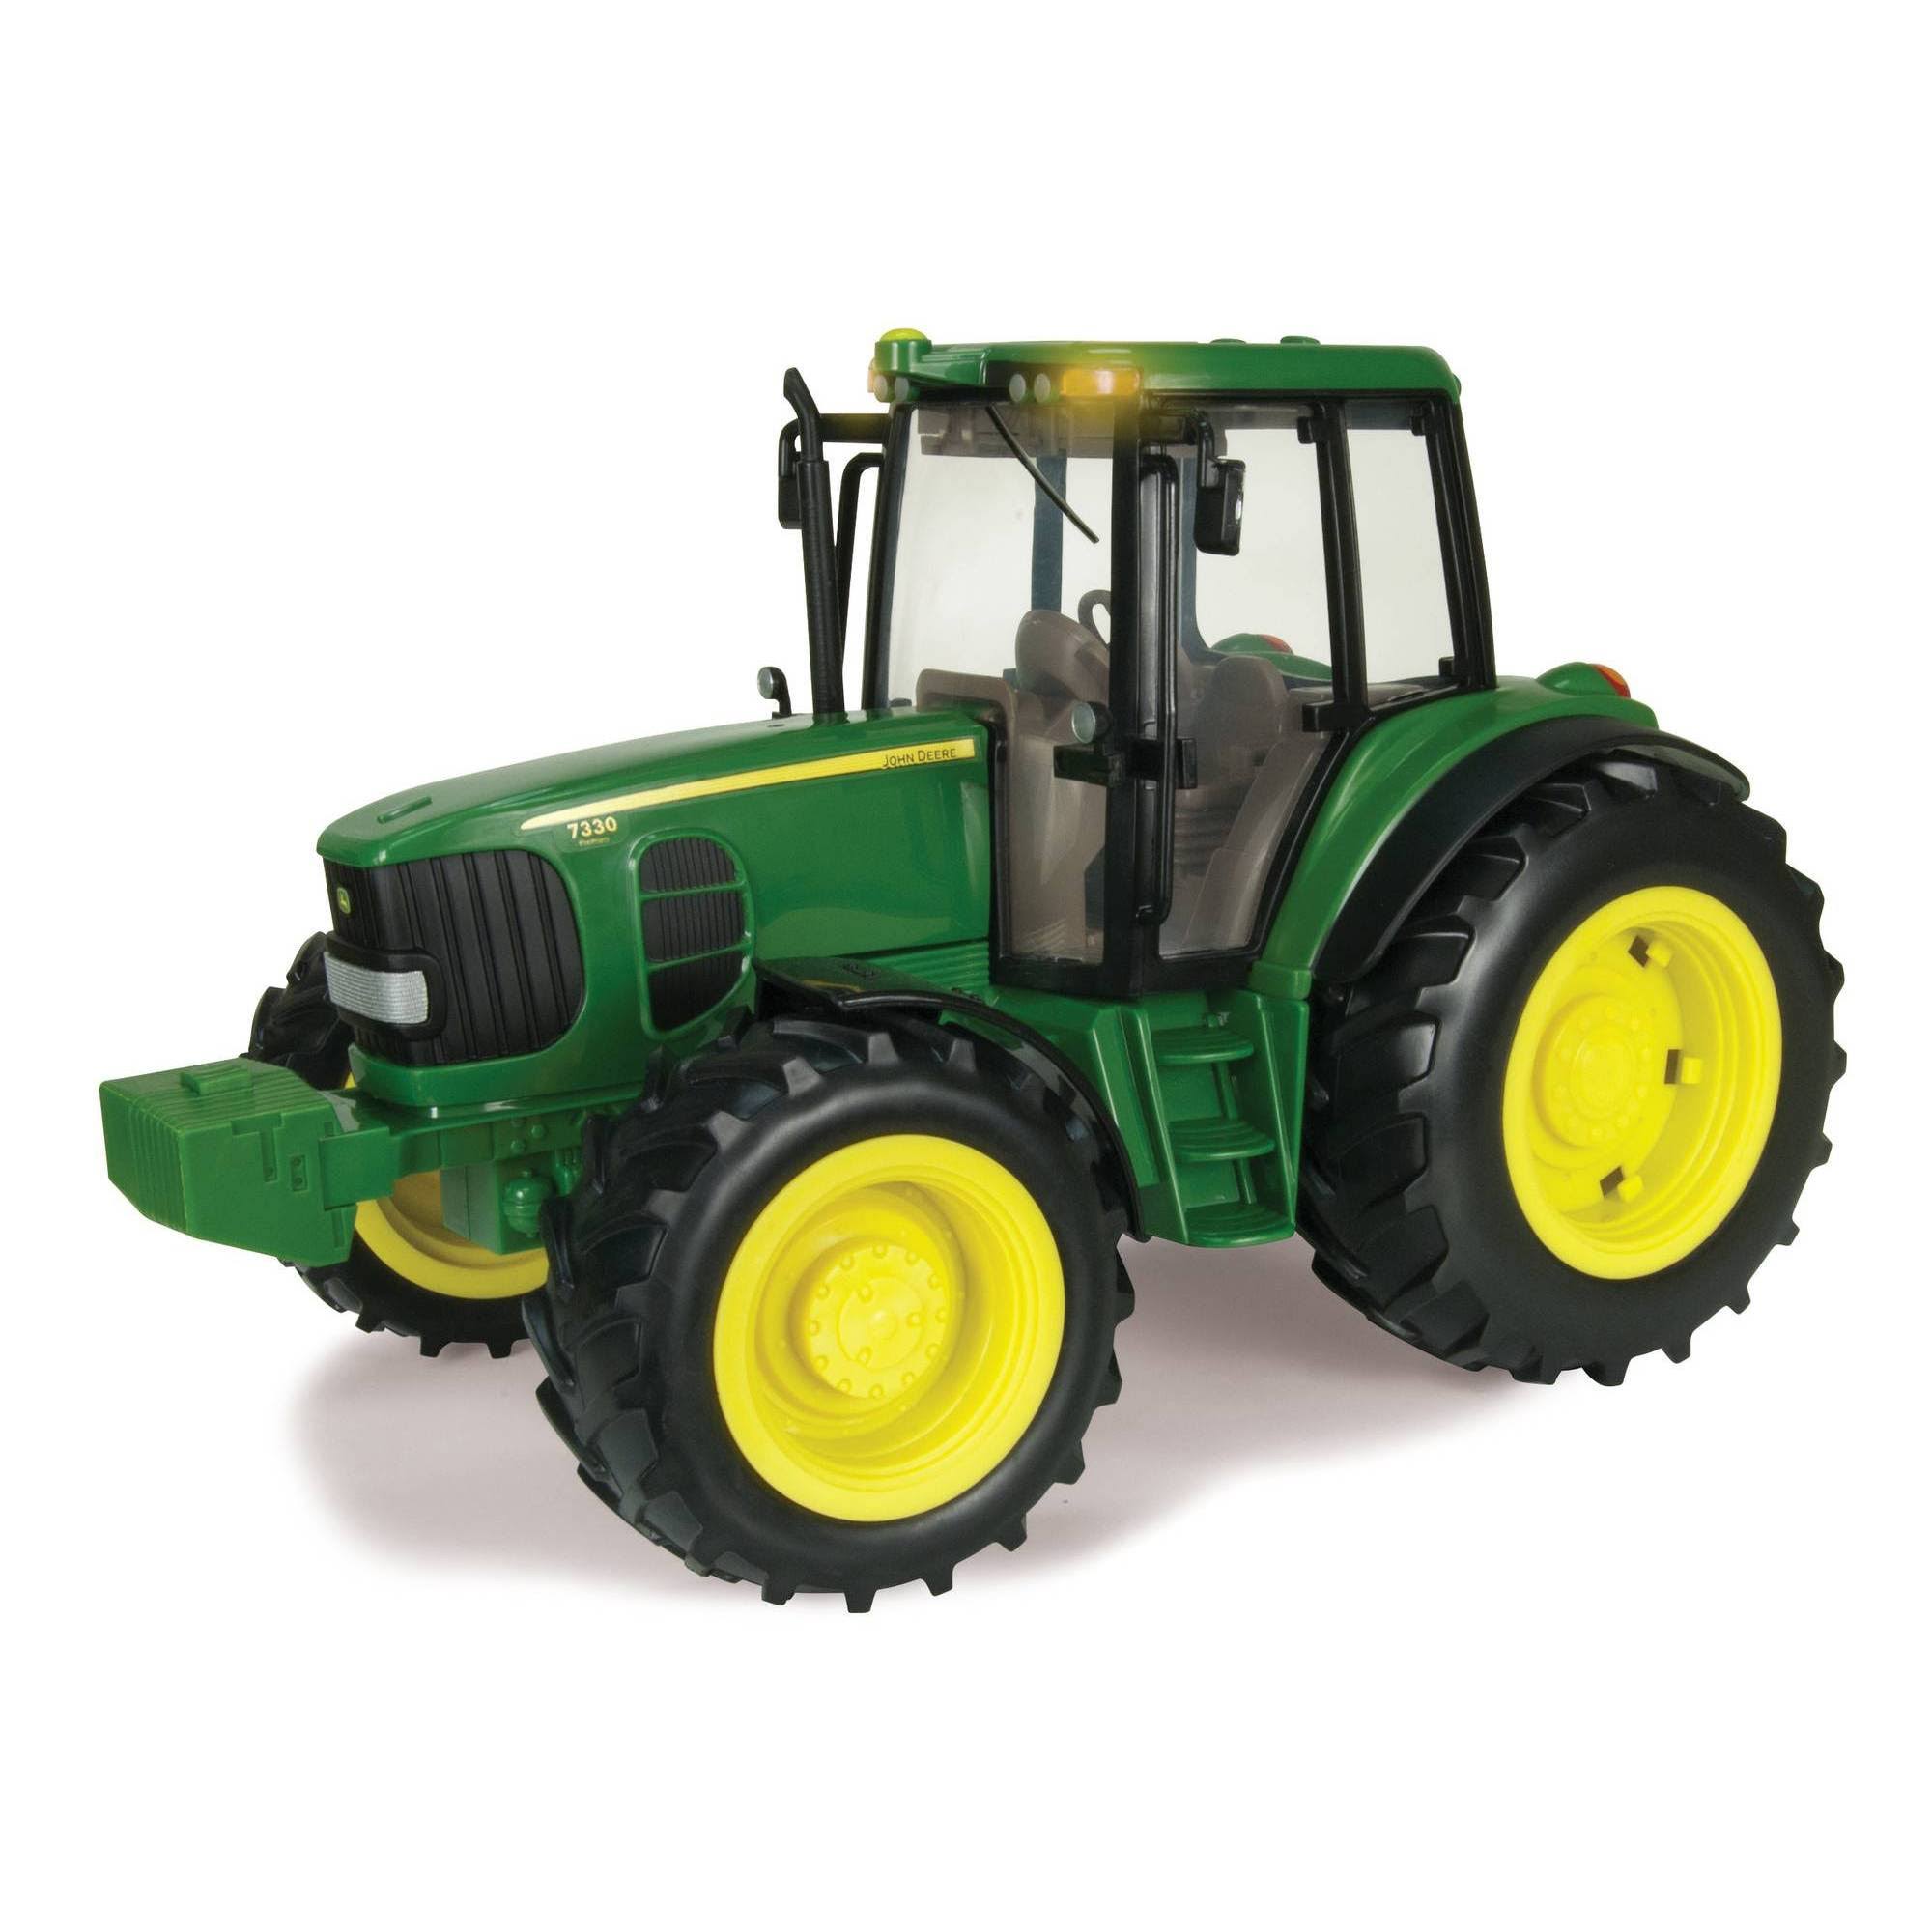 John Deere Big Farm Tractor Lights and Sounds Toy Kids